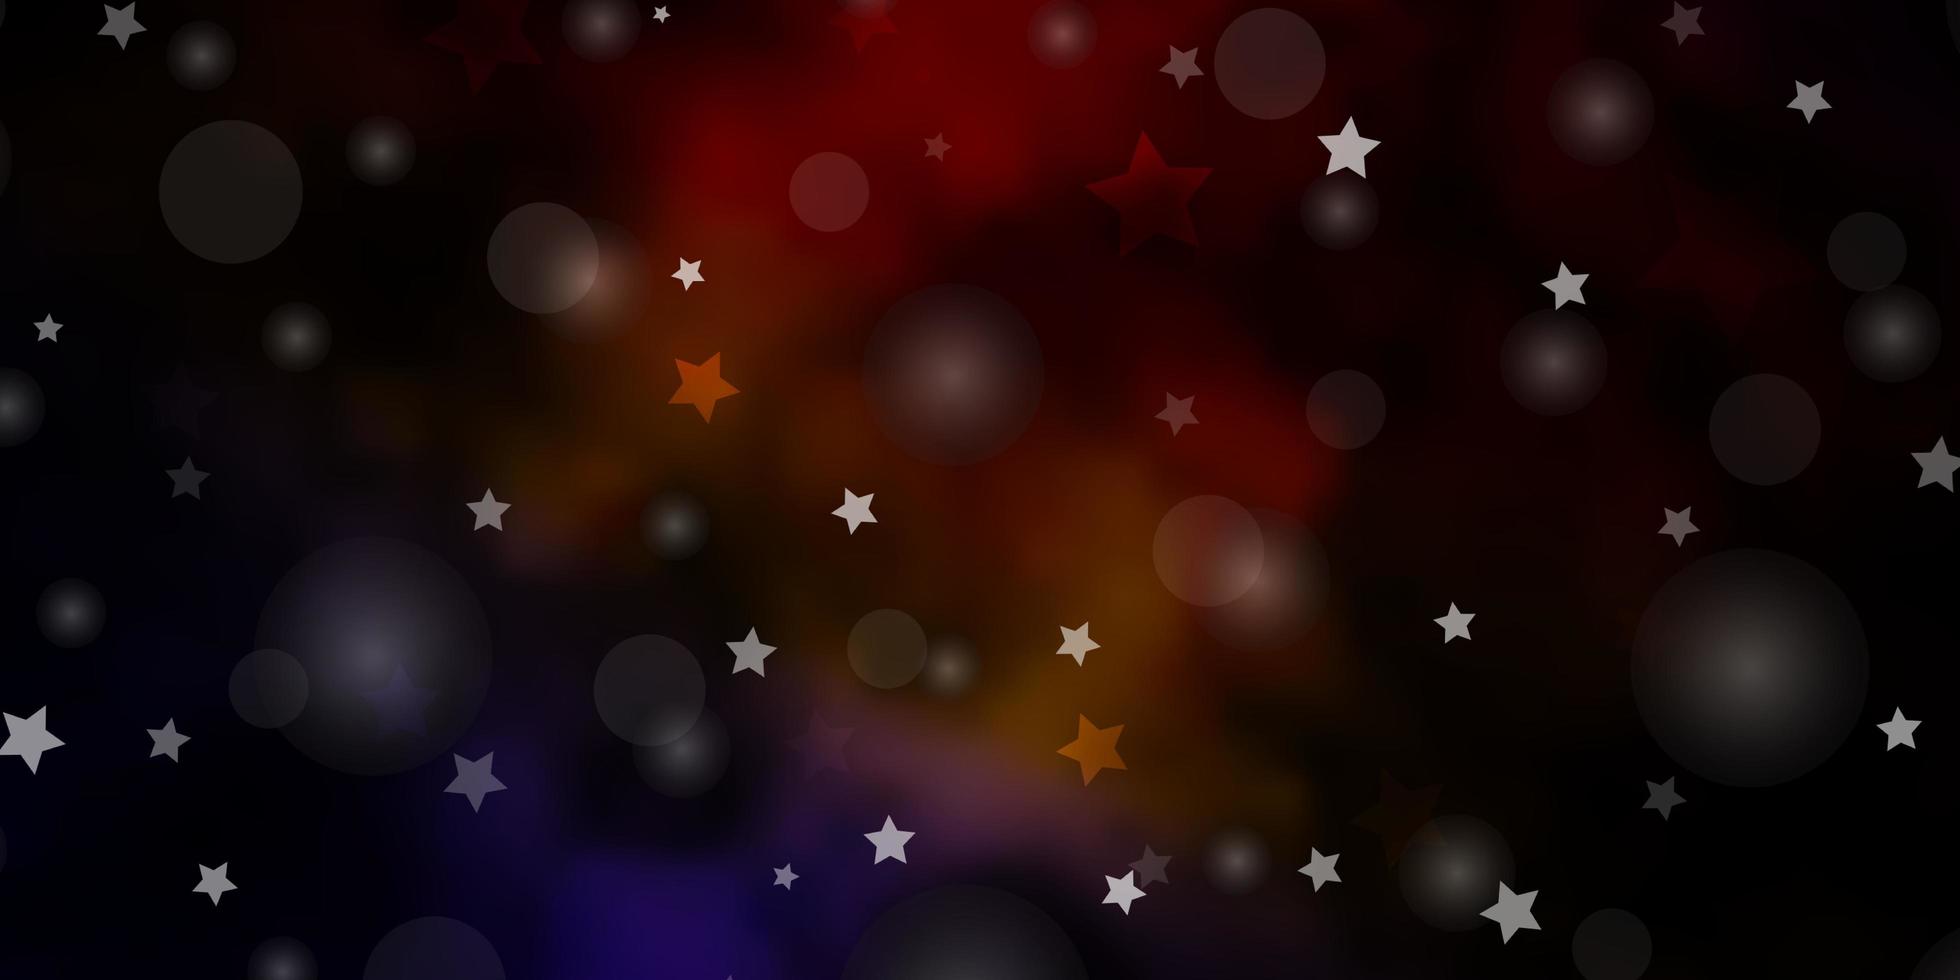 Dark Multicolor vector texture with circles, stars. Colorful disks, stars on simple gradient background. Design for textile, fabric, wallpapers.